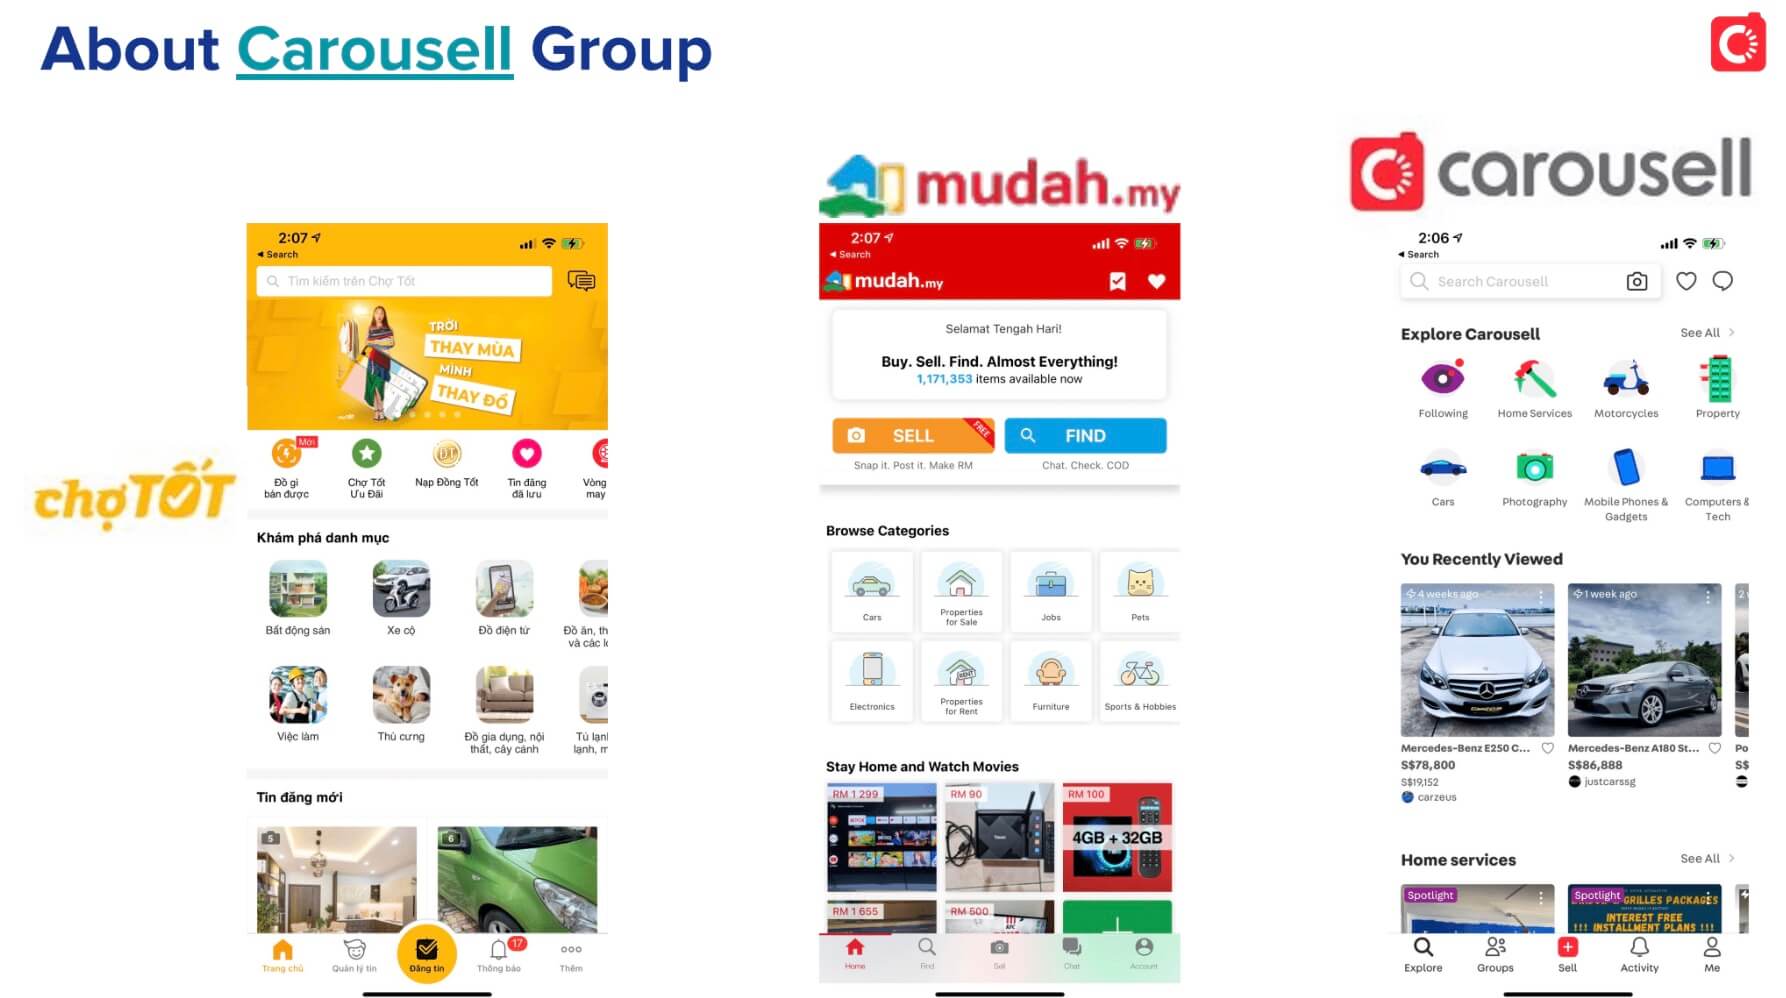 About Carousell Group